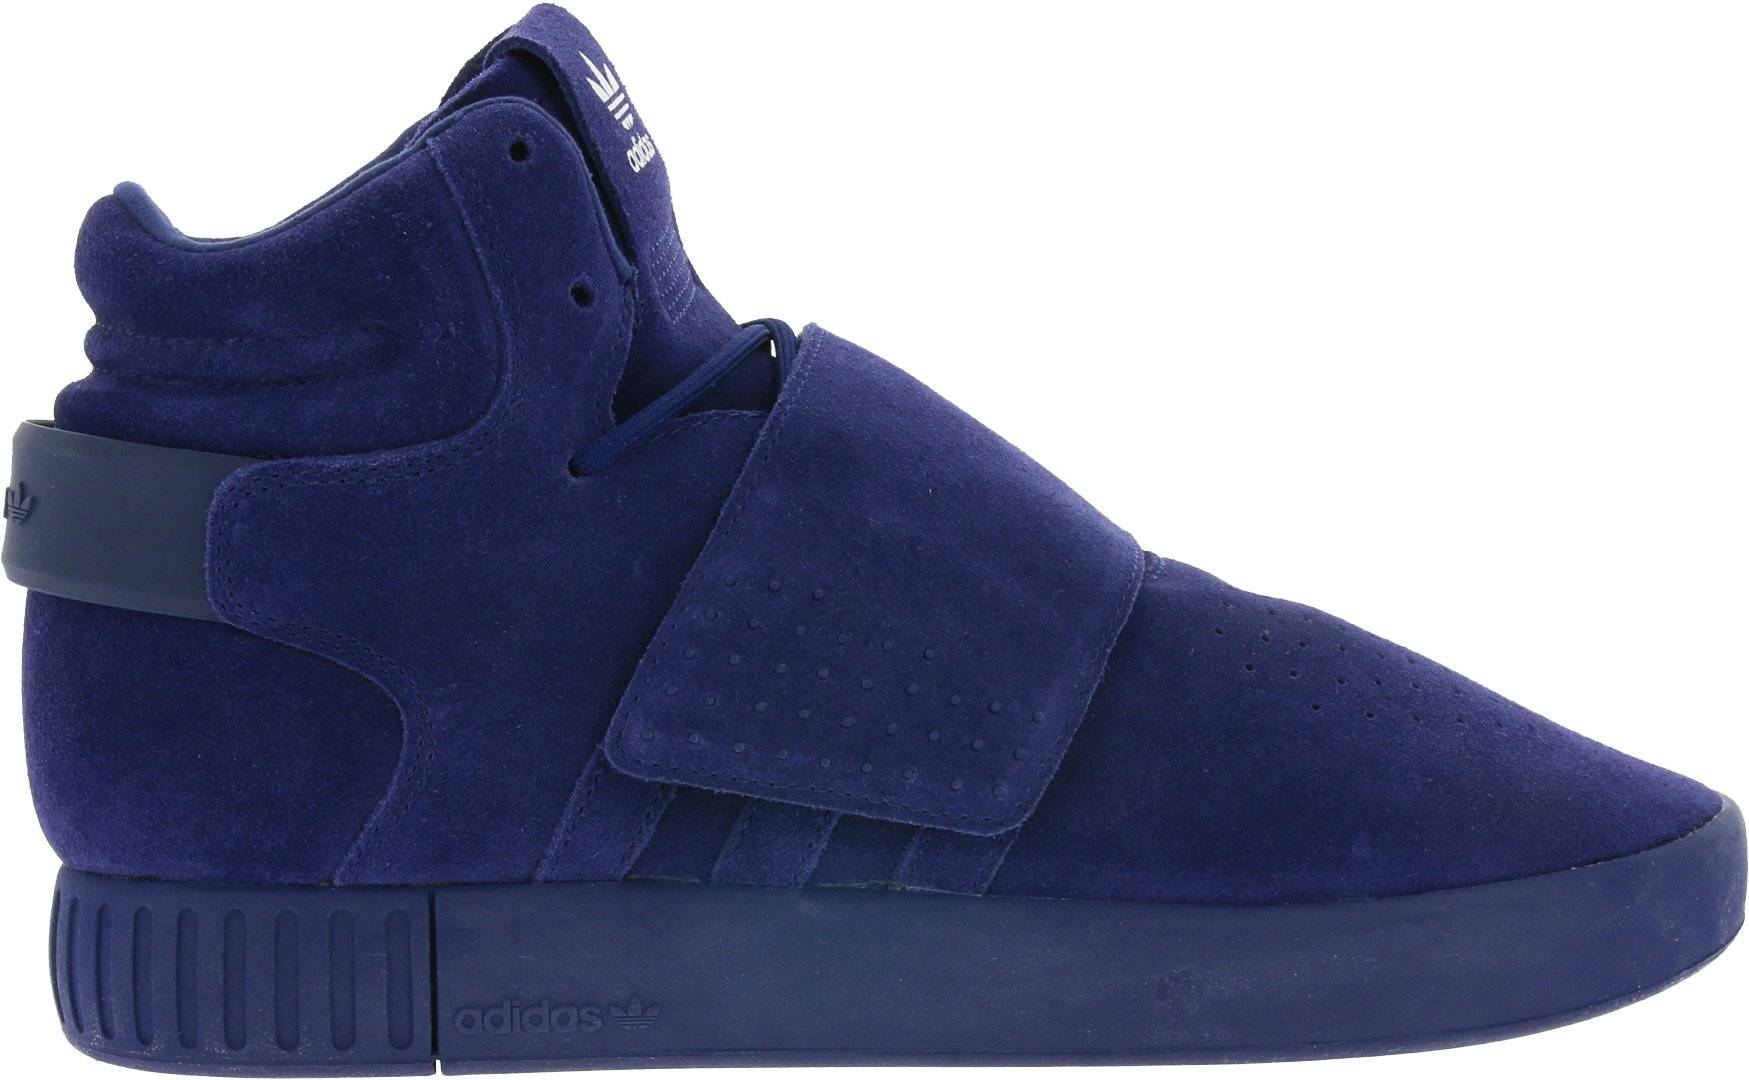 Adidas Tubular Invader Strap sneakers in 7 (only $69) | RunRepeat